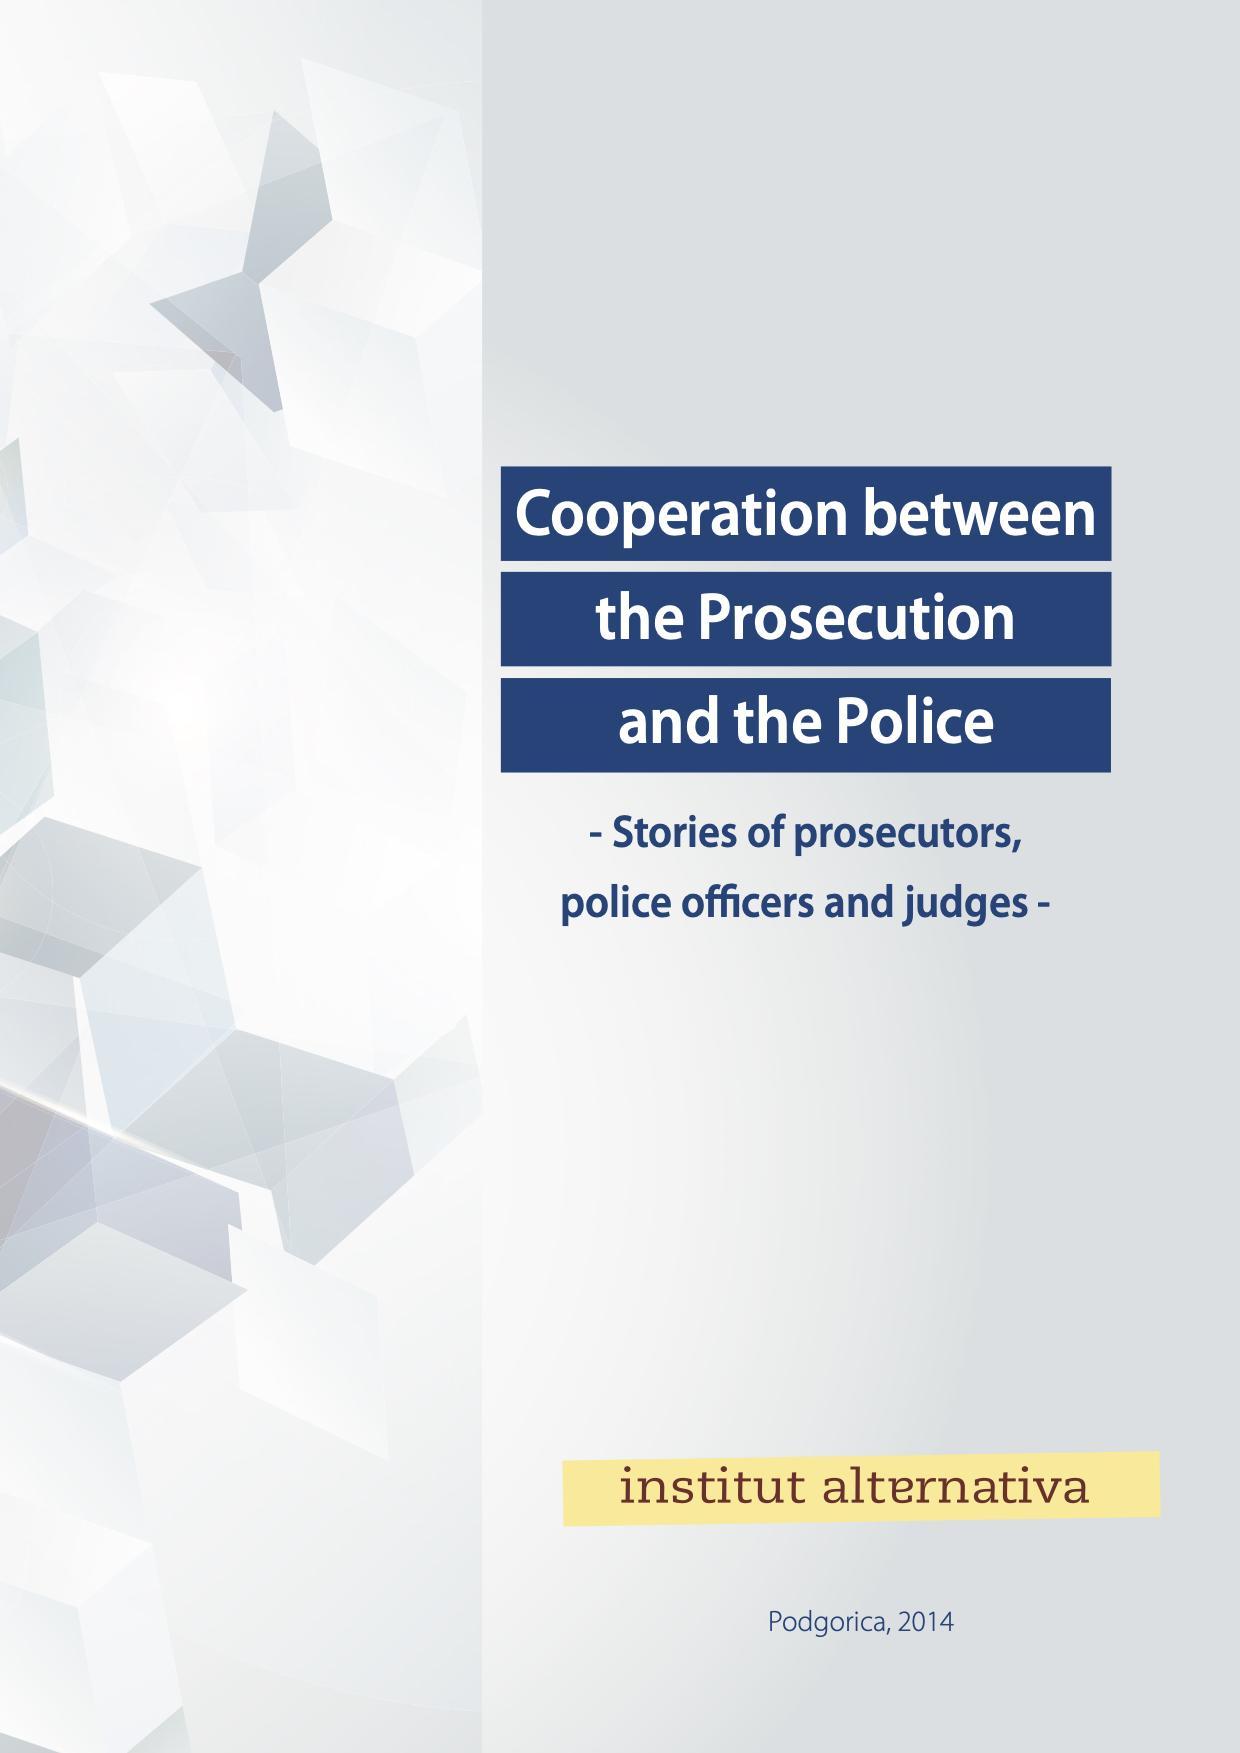 Cooperation Between Police and Prosecution: Stories of prosecutors, police officers and judges